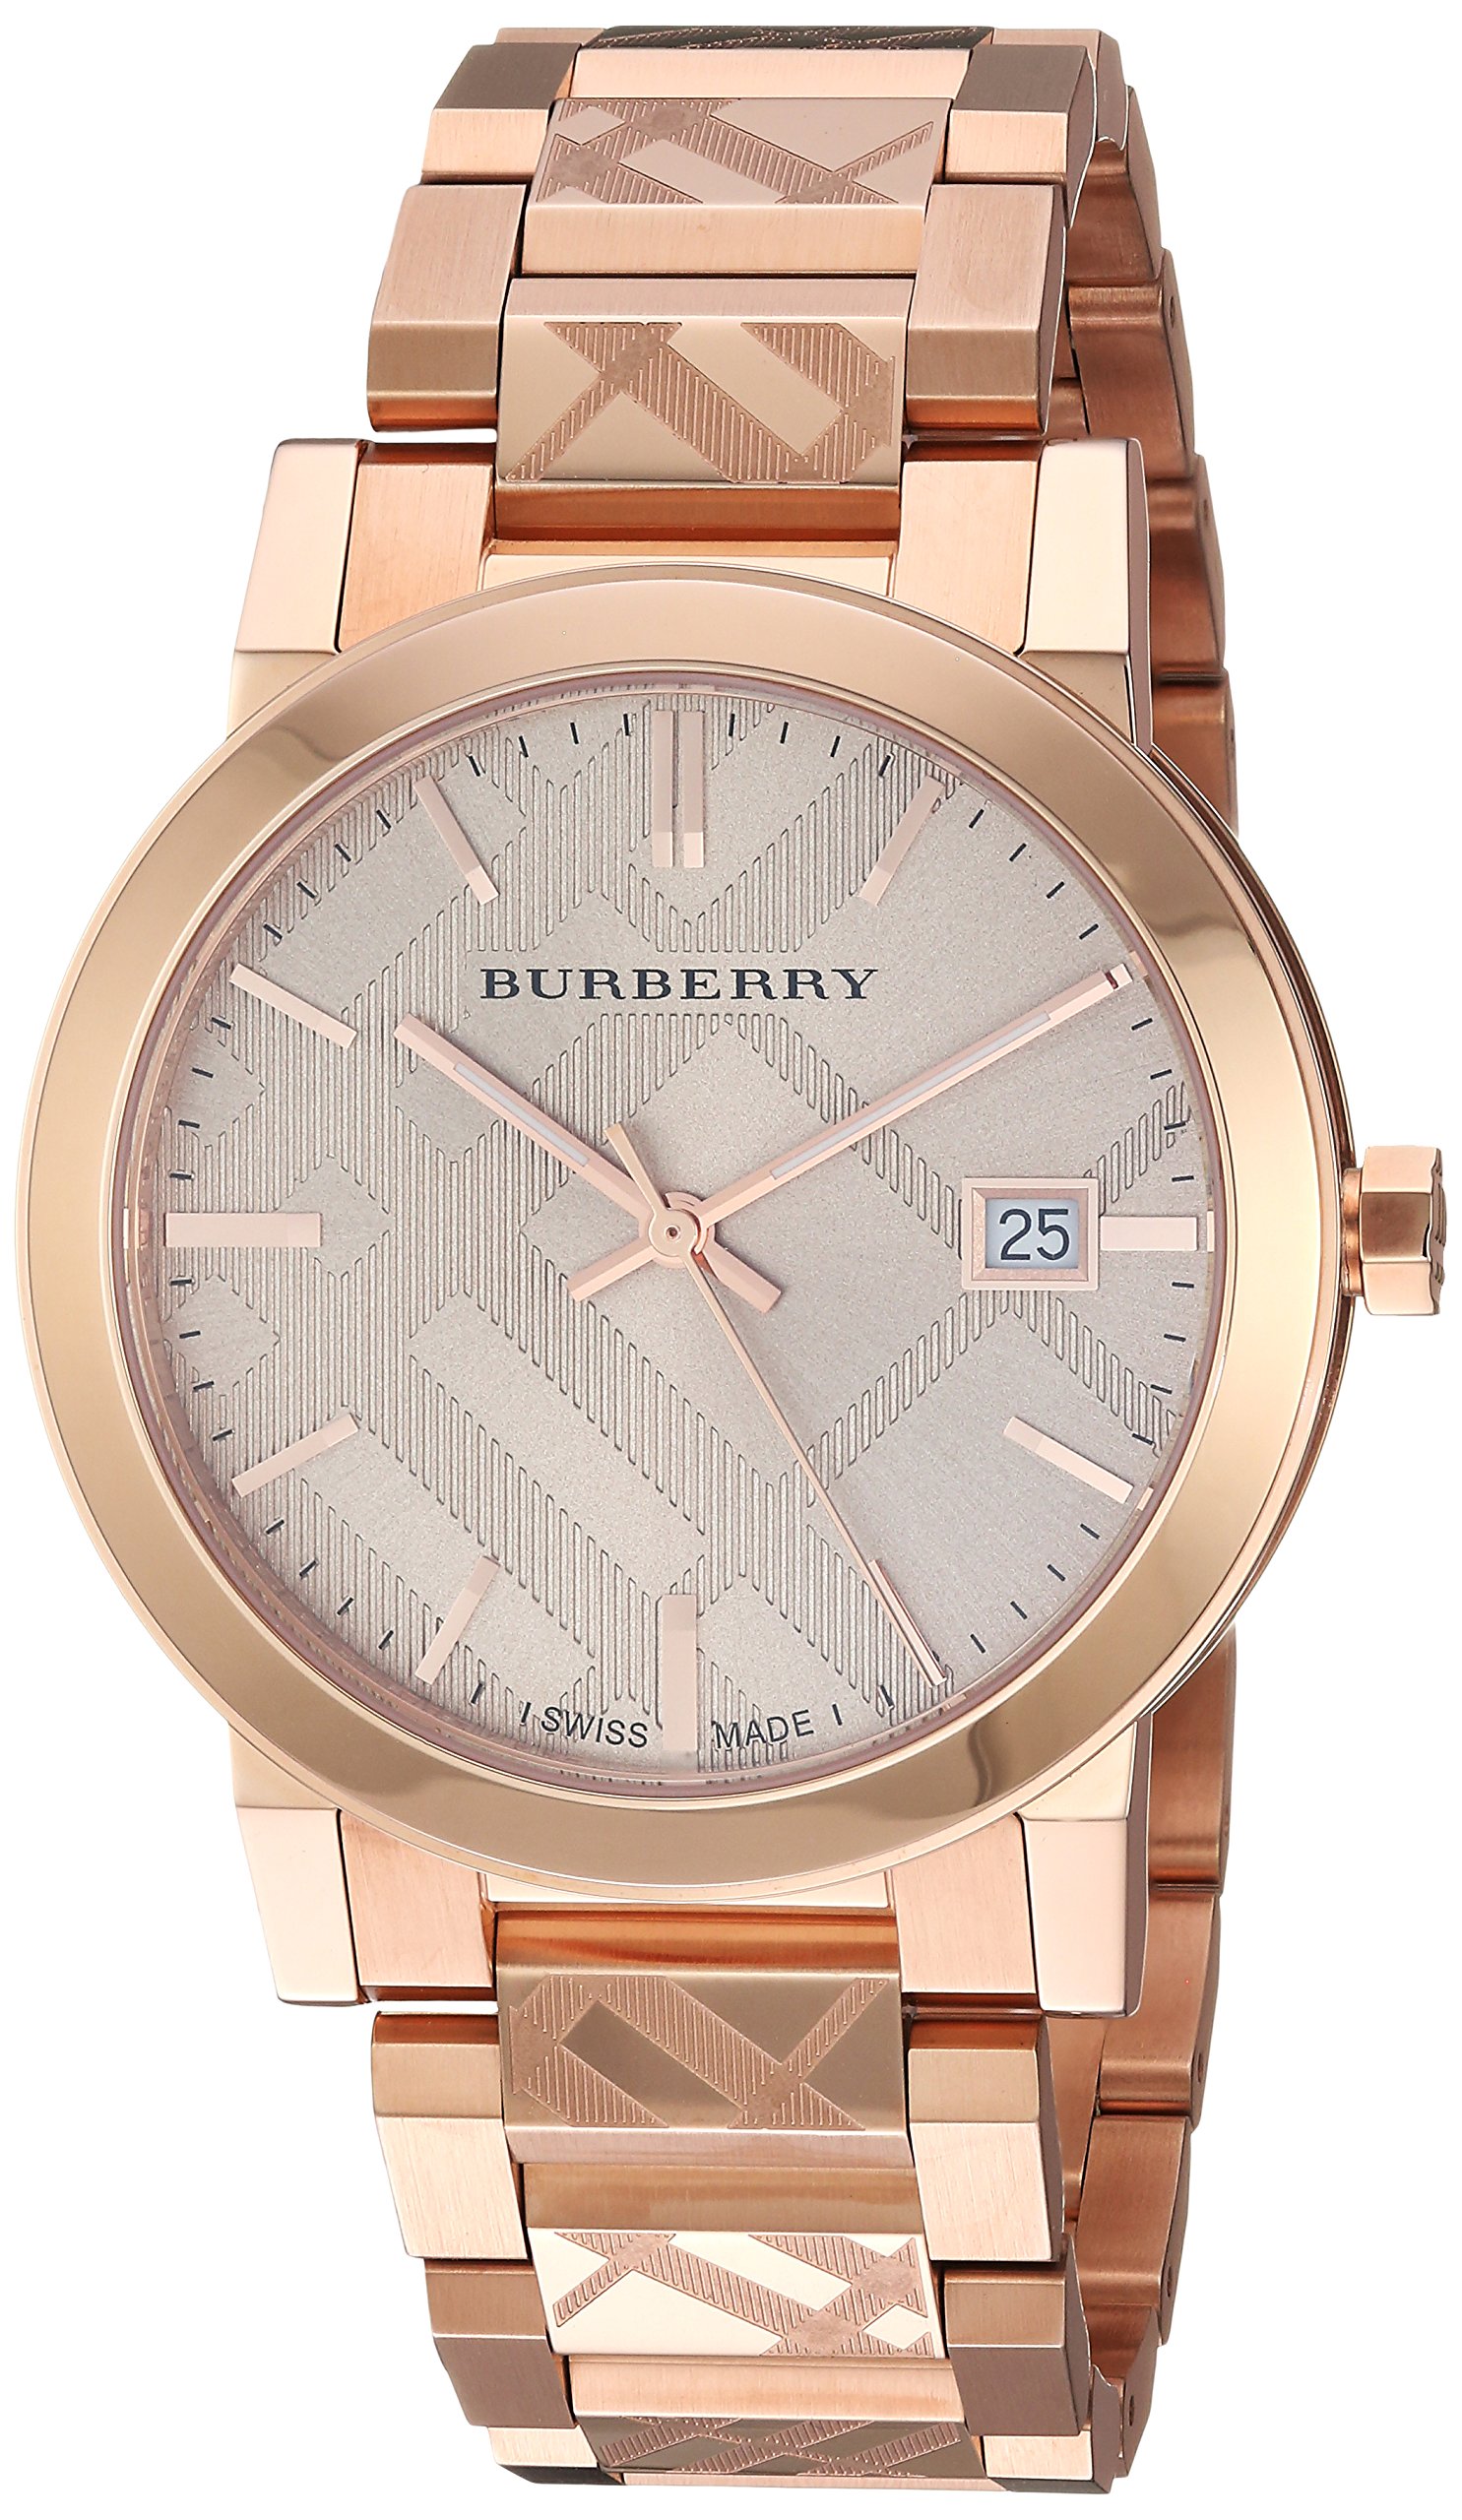 Arriba 60+ imagen how much are burberry watches